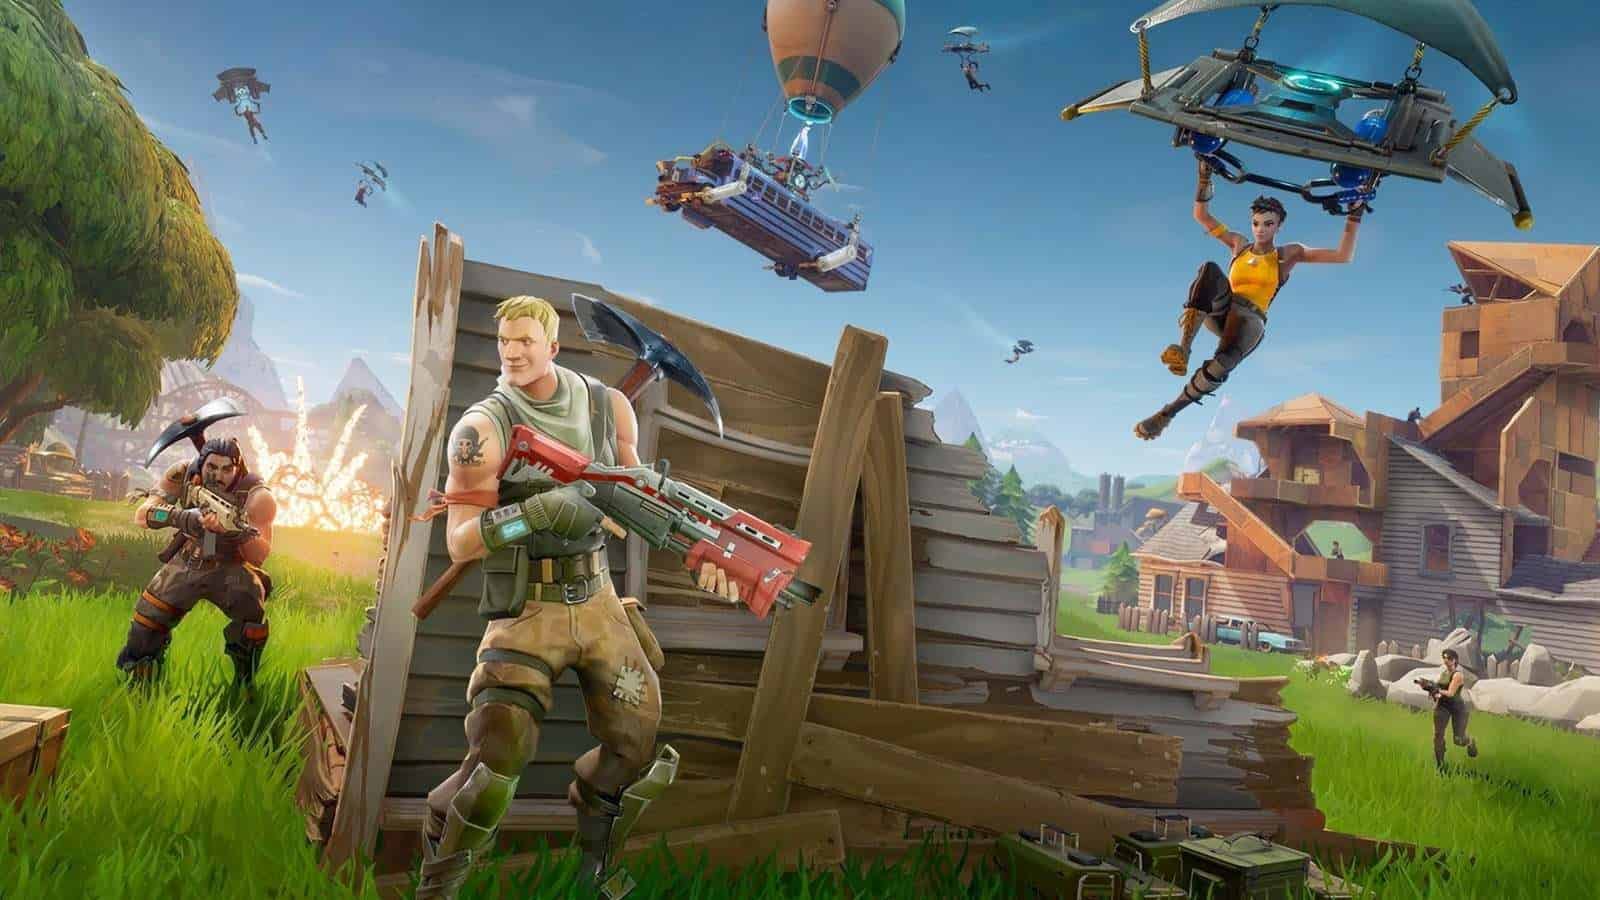 Fortnite Players Have Clocked Over 10.4 Million Cumulative YEARS In-Game